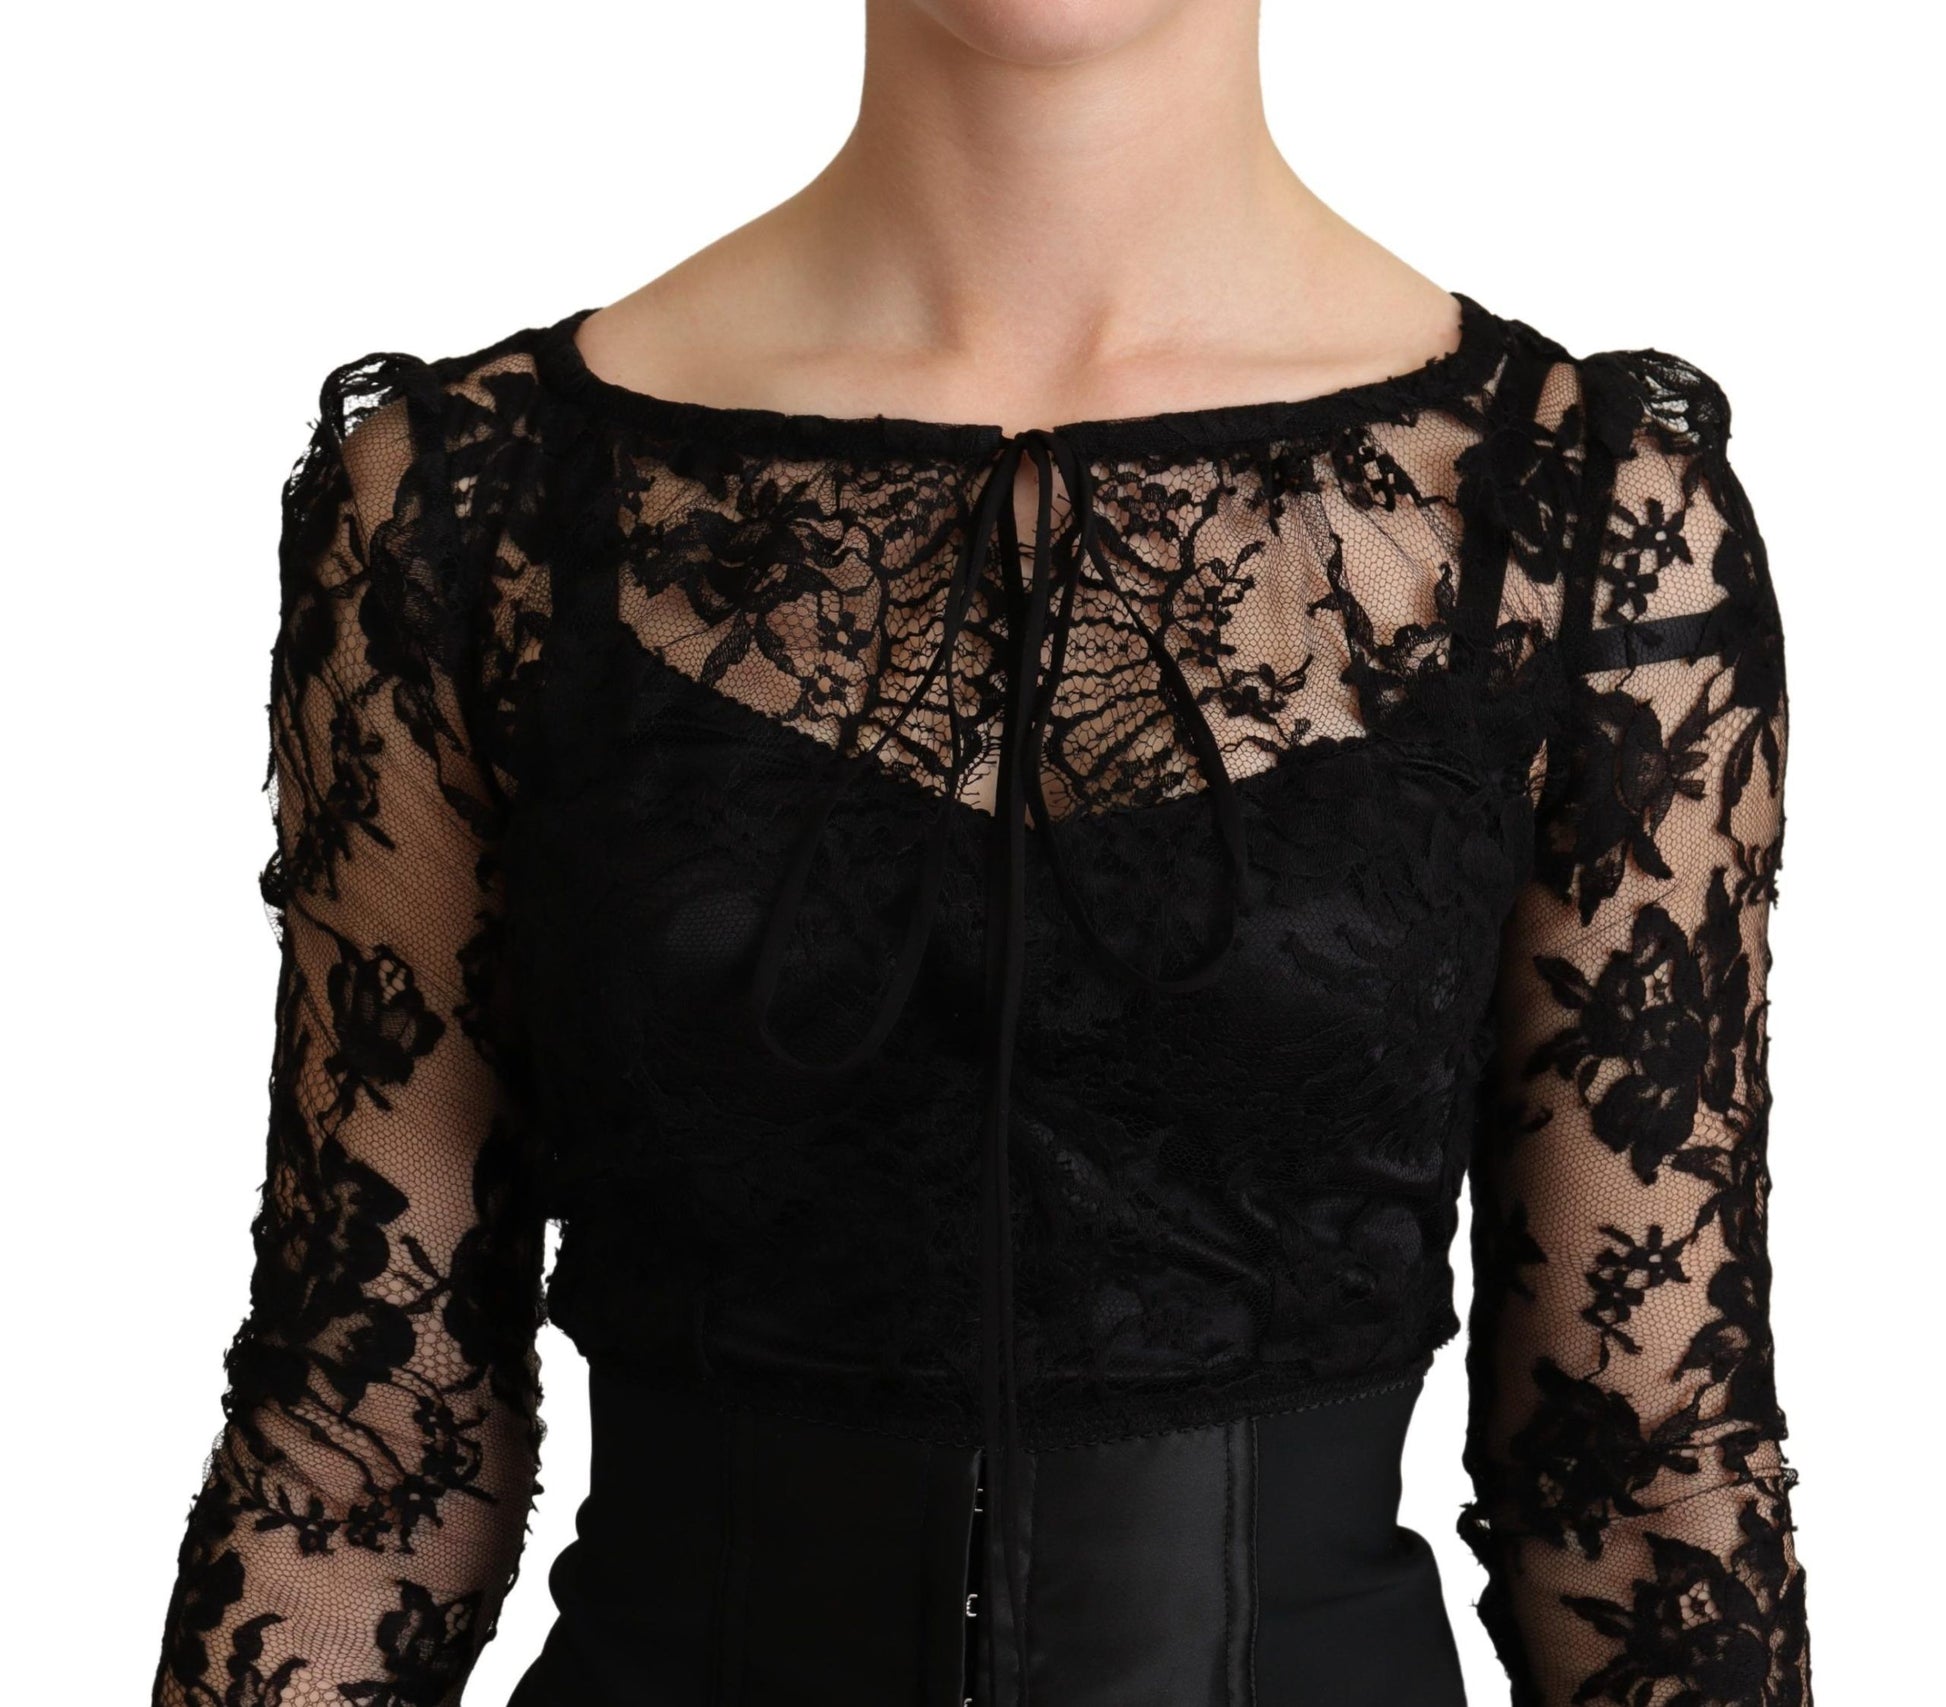 Black Fitted Lace Top Bodycon Mini Dress - Designed by Dolce & Gabbana Available to Buy at a Discounted Price on Moon Behind The Hill Online Designer Discount Store